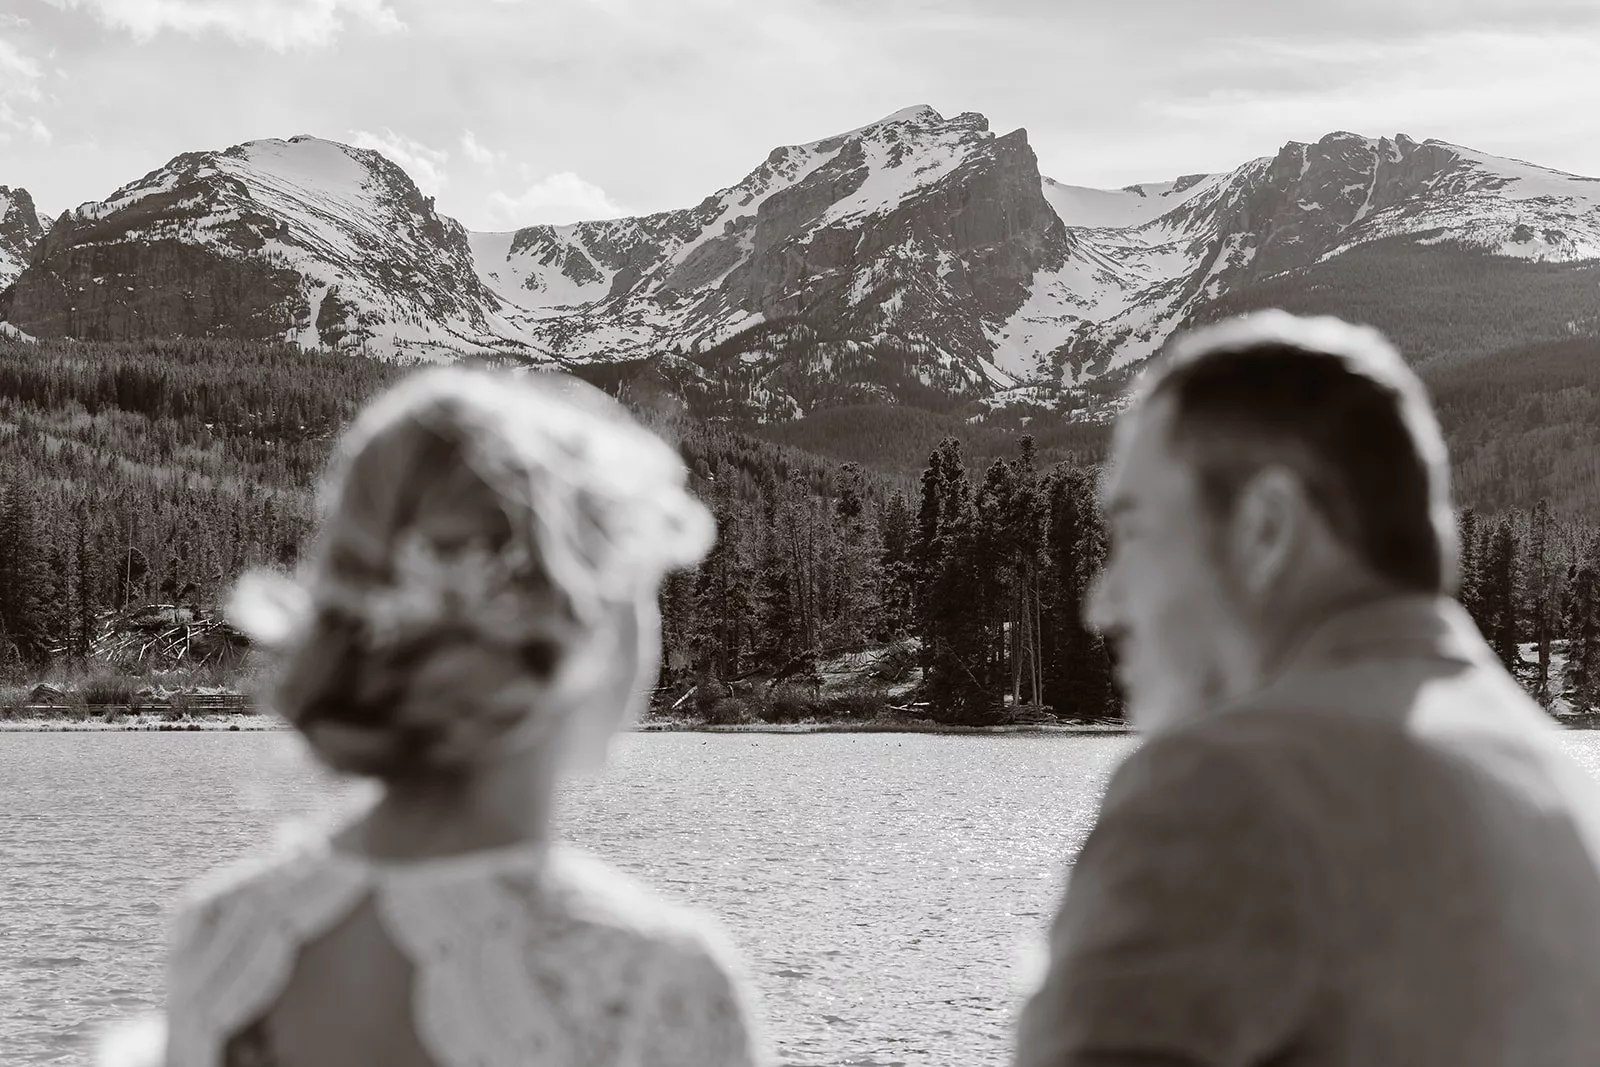 A bride and groom stare out into the mountain landscape during their elopement day, a day they planned according to their own standards.